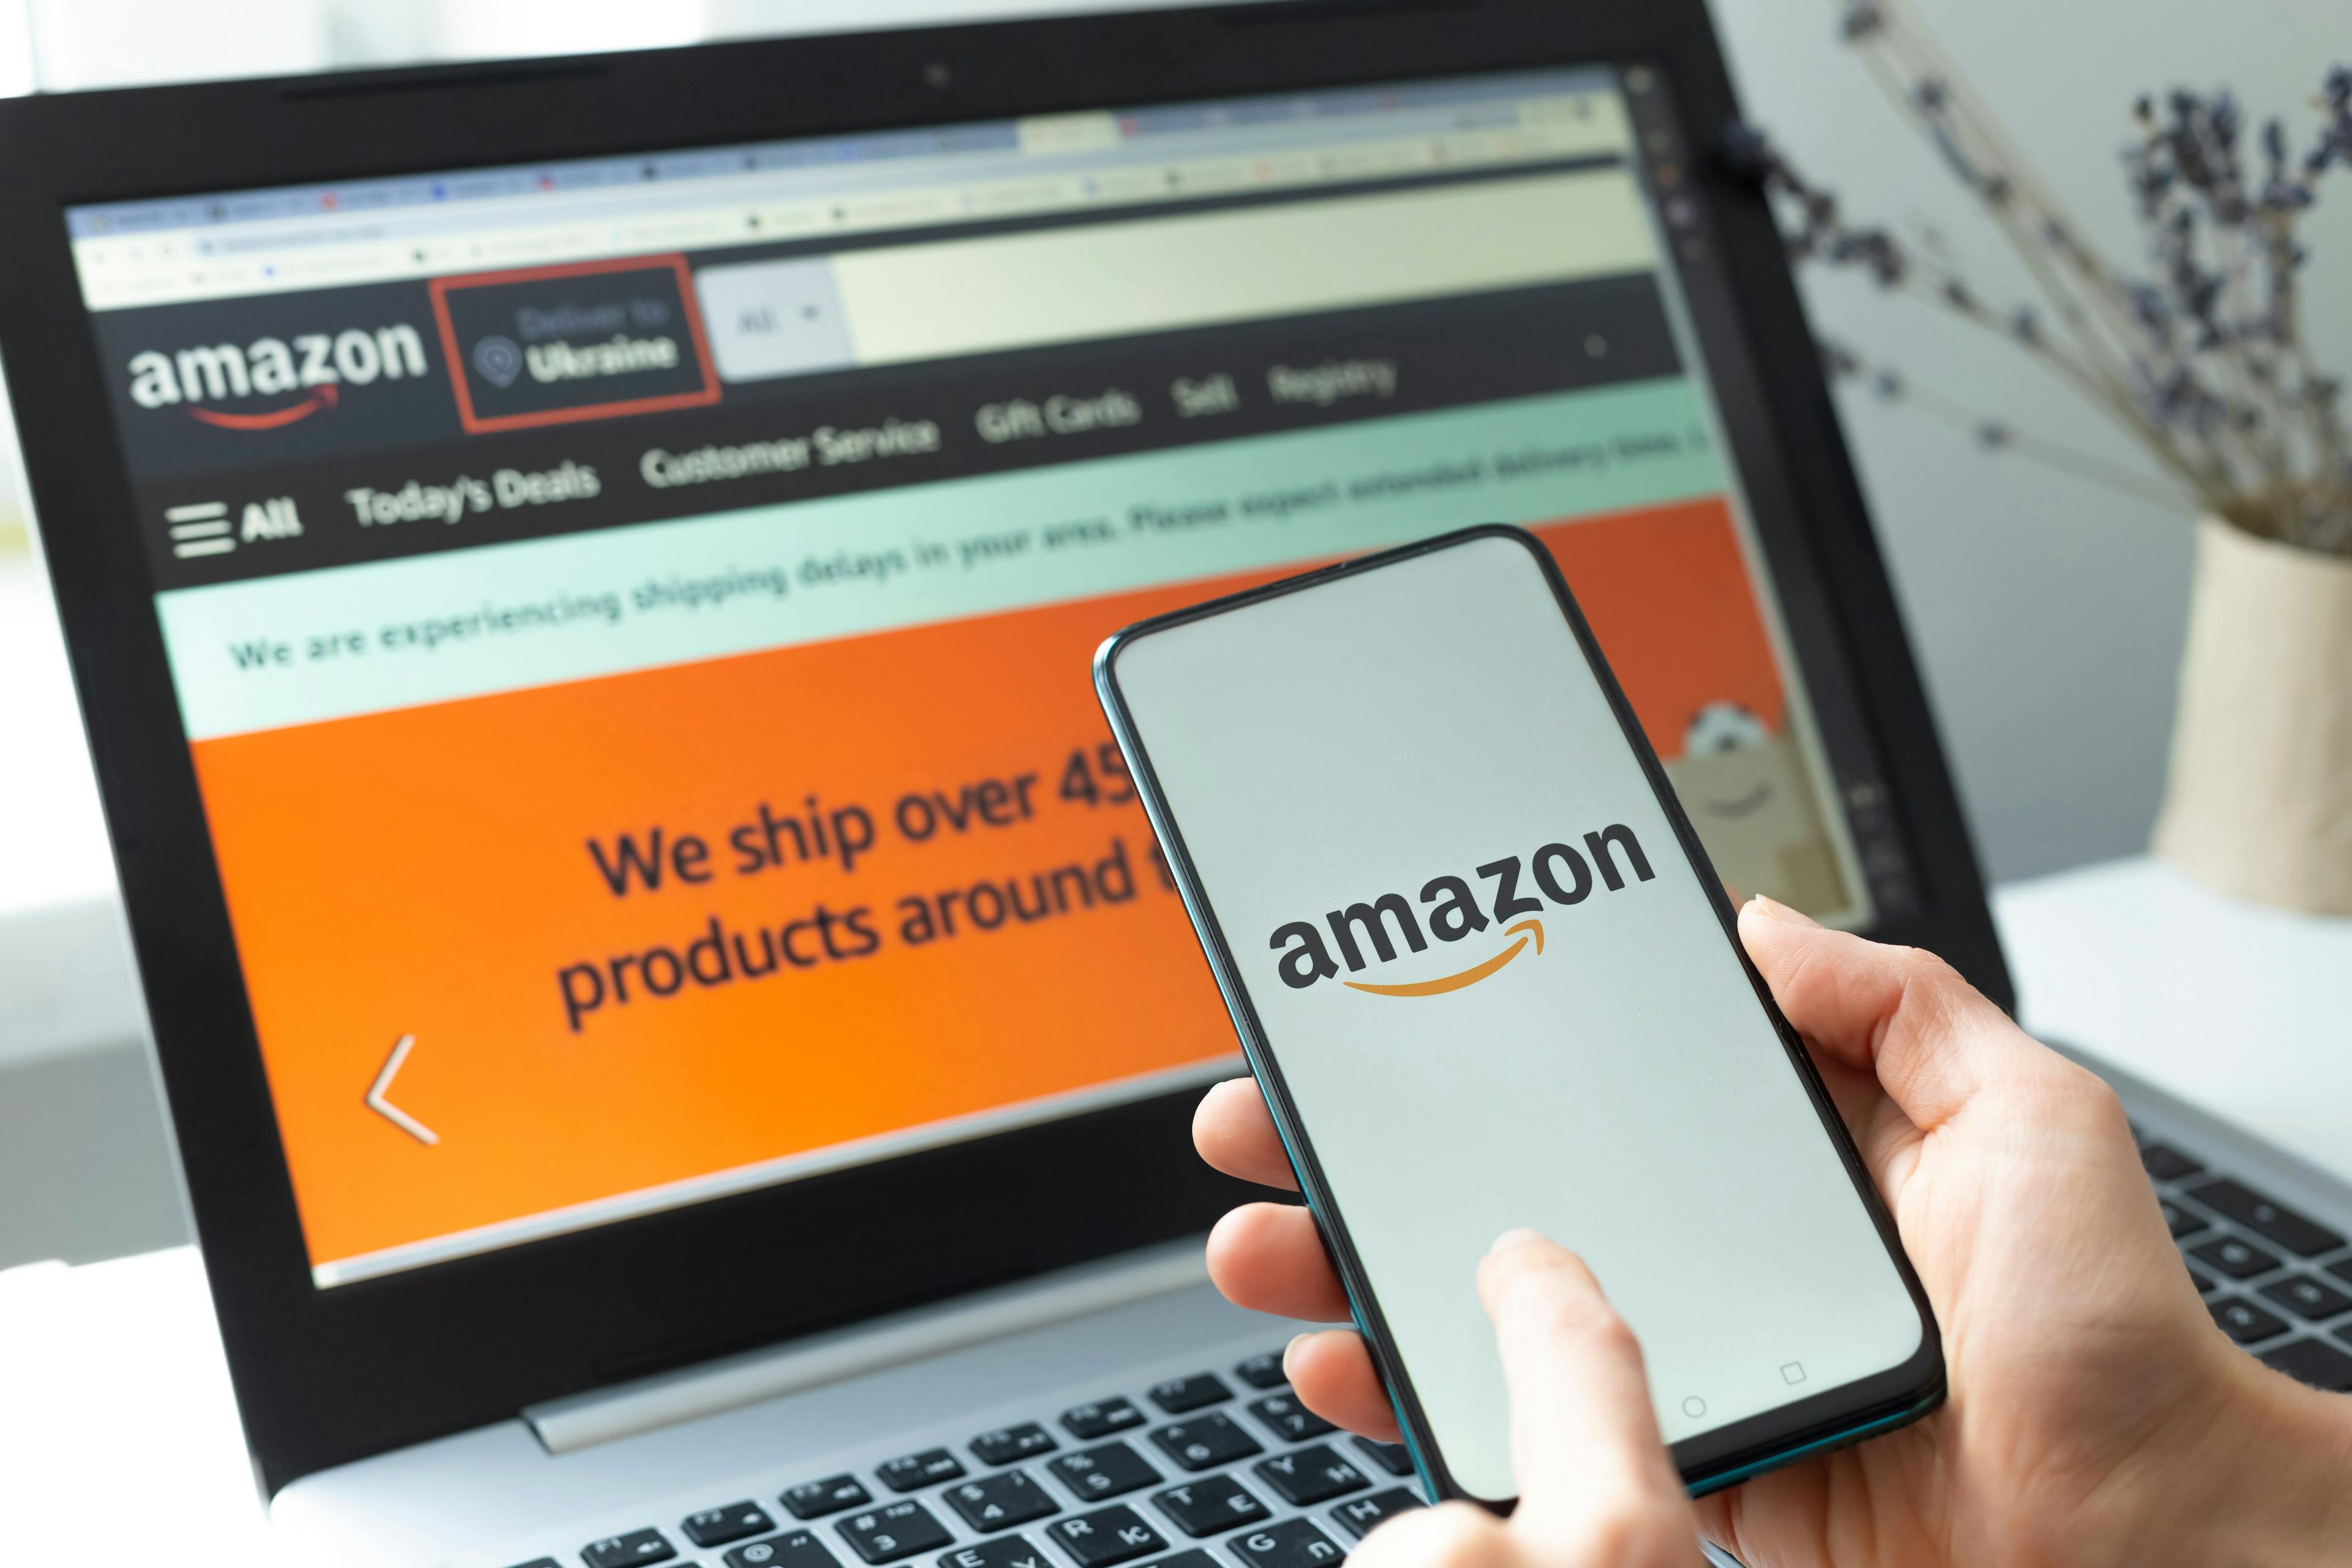 Amazon expands its One Medical service to major corporations: ©Olek Sandr - stock.adobe.com